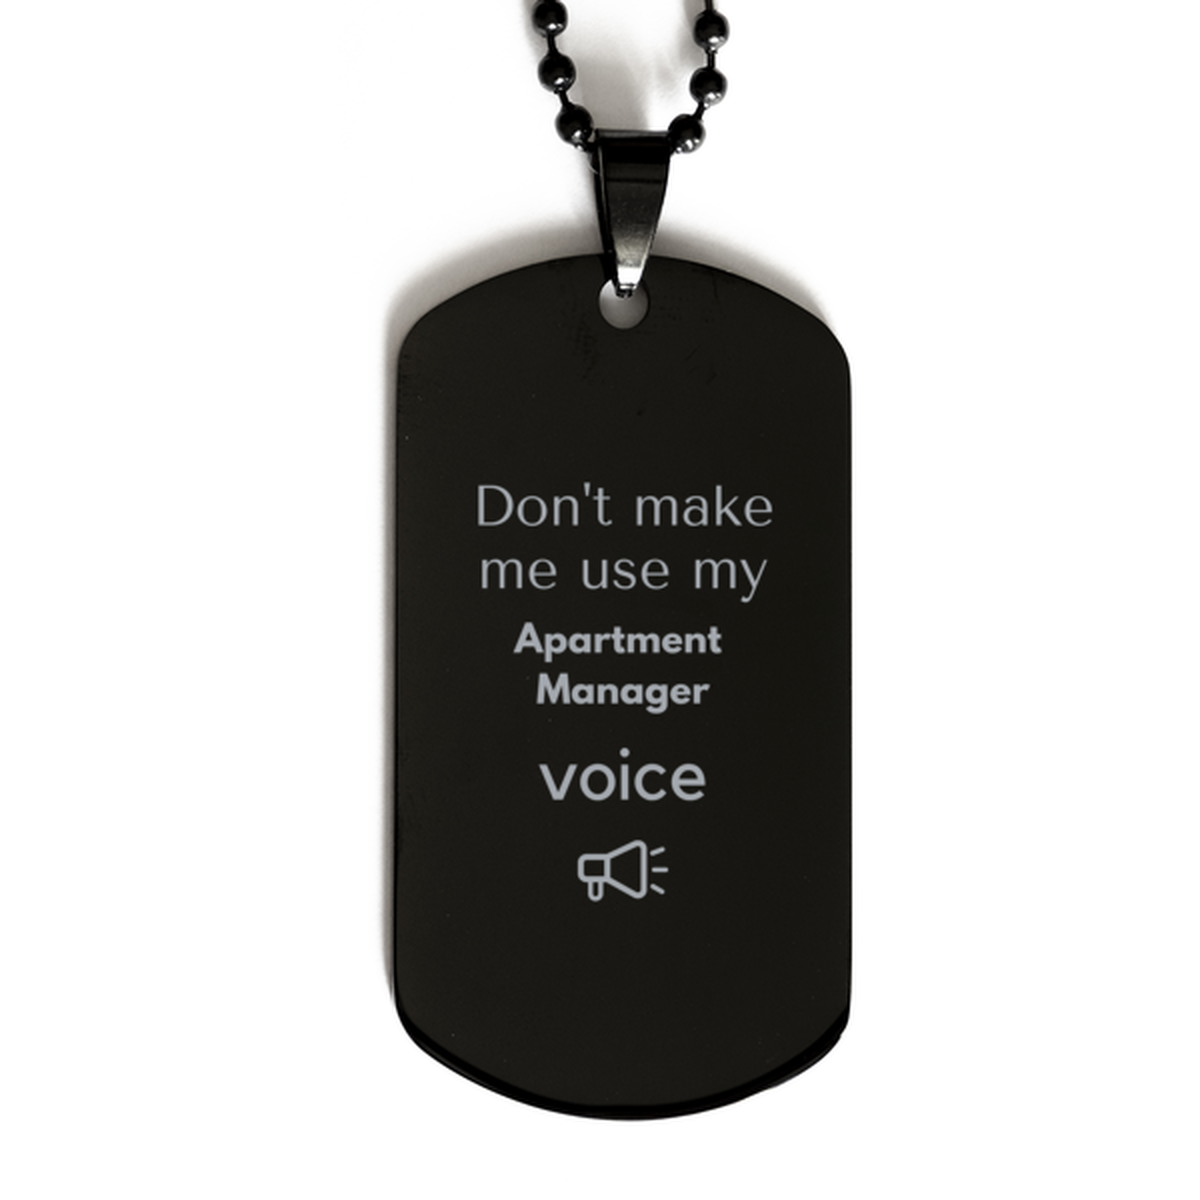 Don't make me use my Apartment Manager voice, Sarcasm Apartment Manager Gifts, Christmas Apartment Manager Black Dog Tag Birthday Unique Gifts For Apartment Manager Coworkers, Men, Women, Colleague, Friends